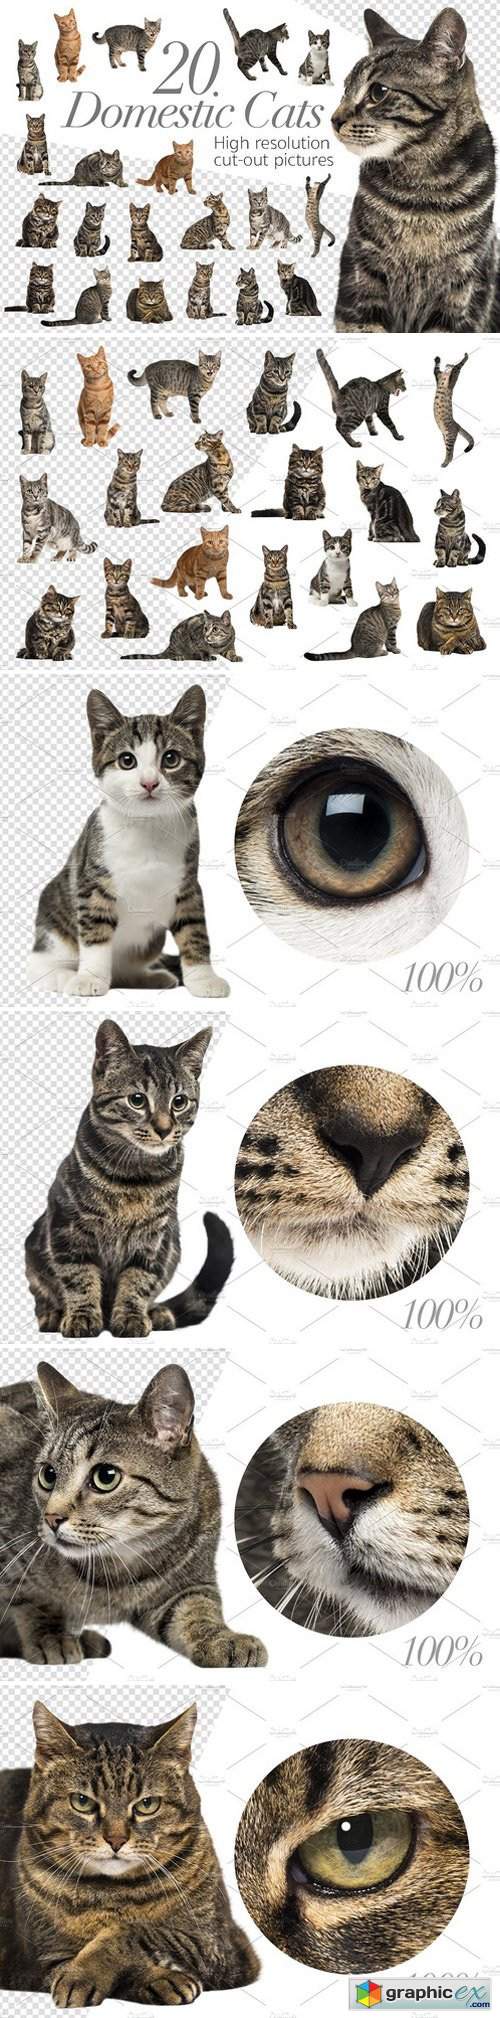 20 Domestic Cats - Cut-out Pictures